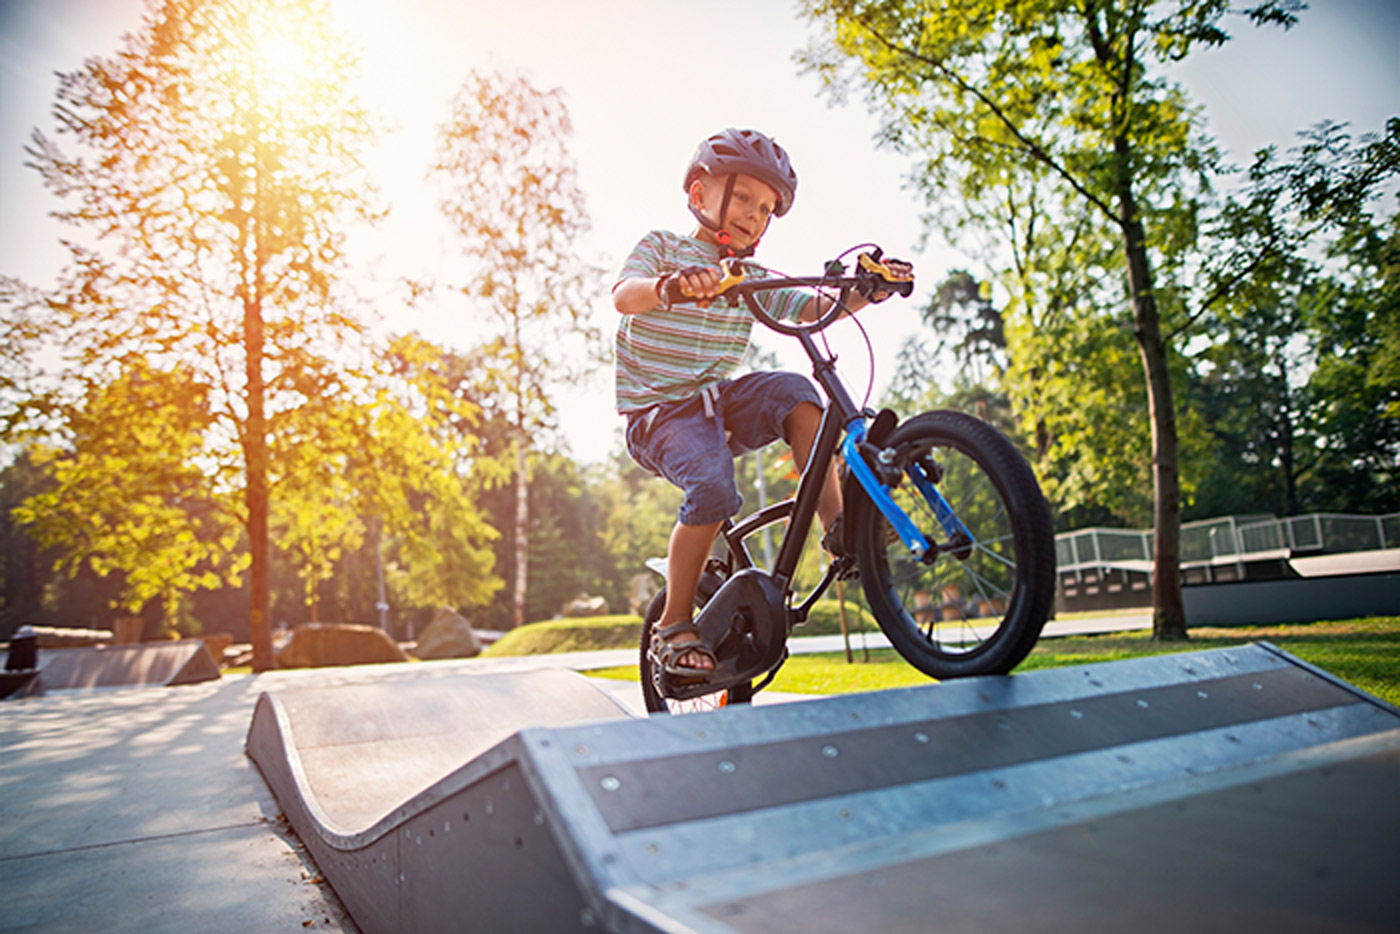 A child rides his bike over a ramp.